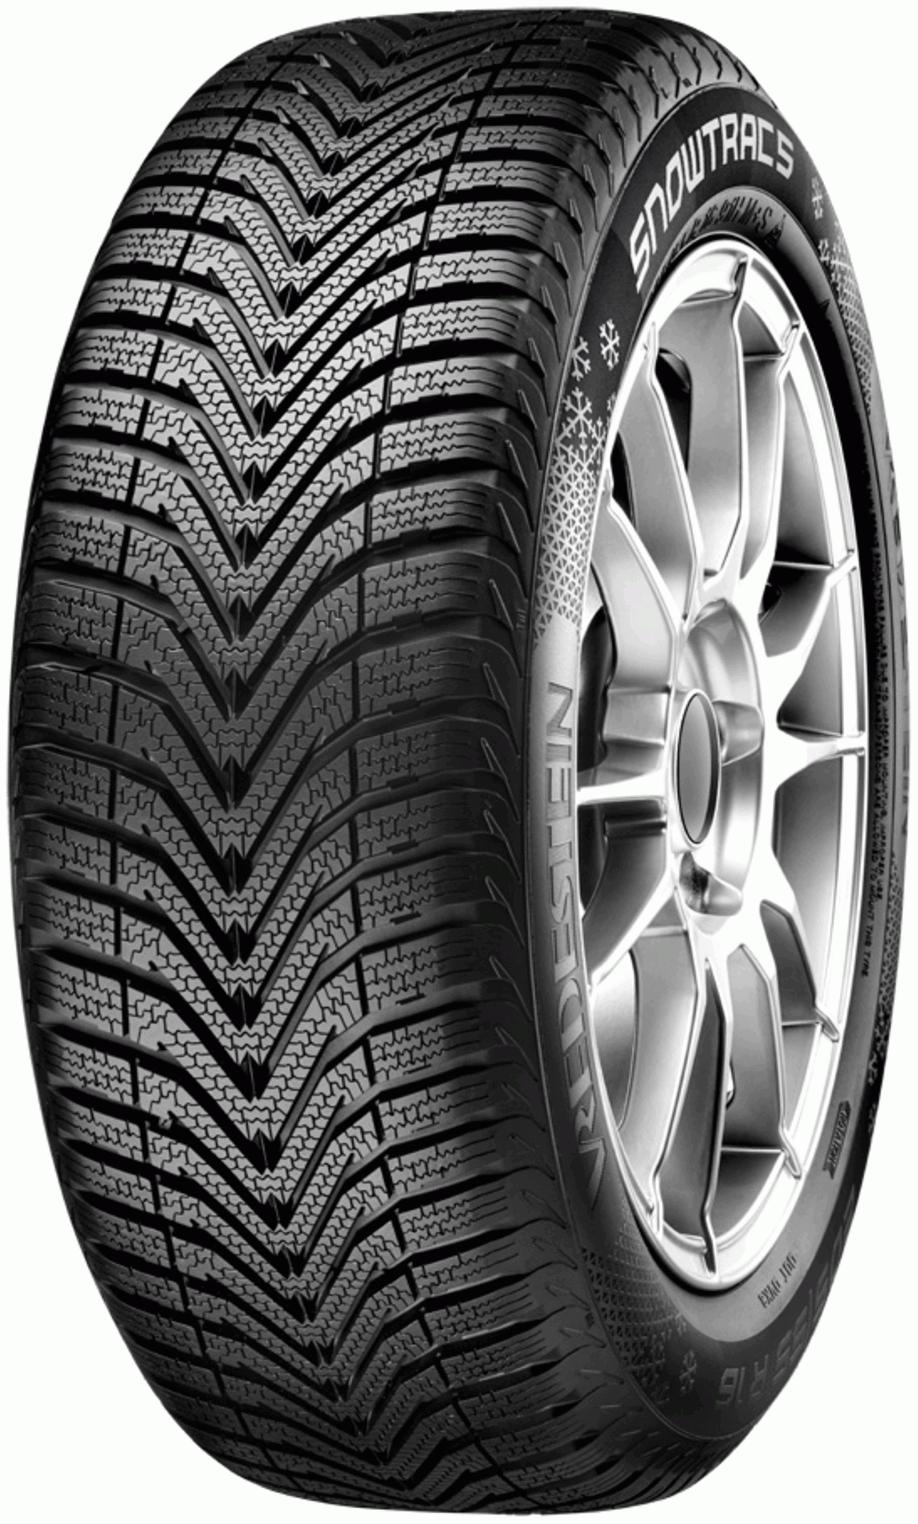 - 5 Vredestein Reviews Snowtrac Tests and Tire